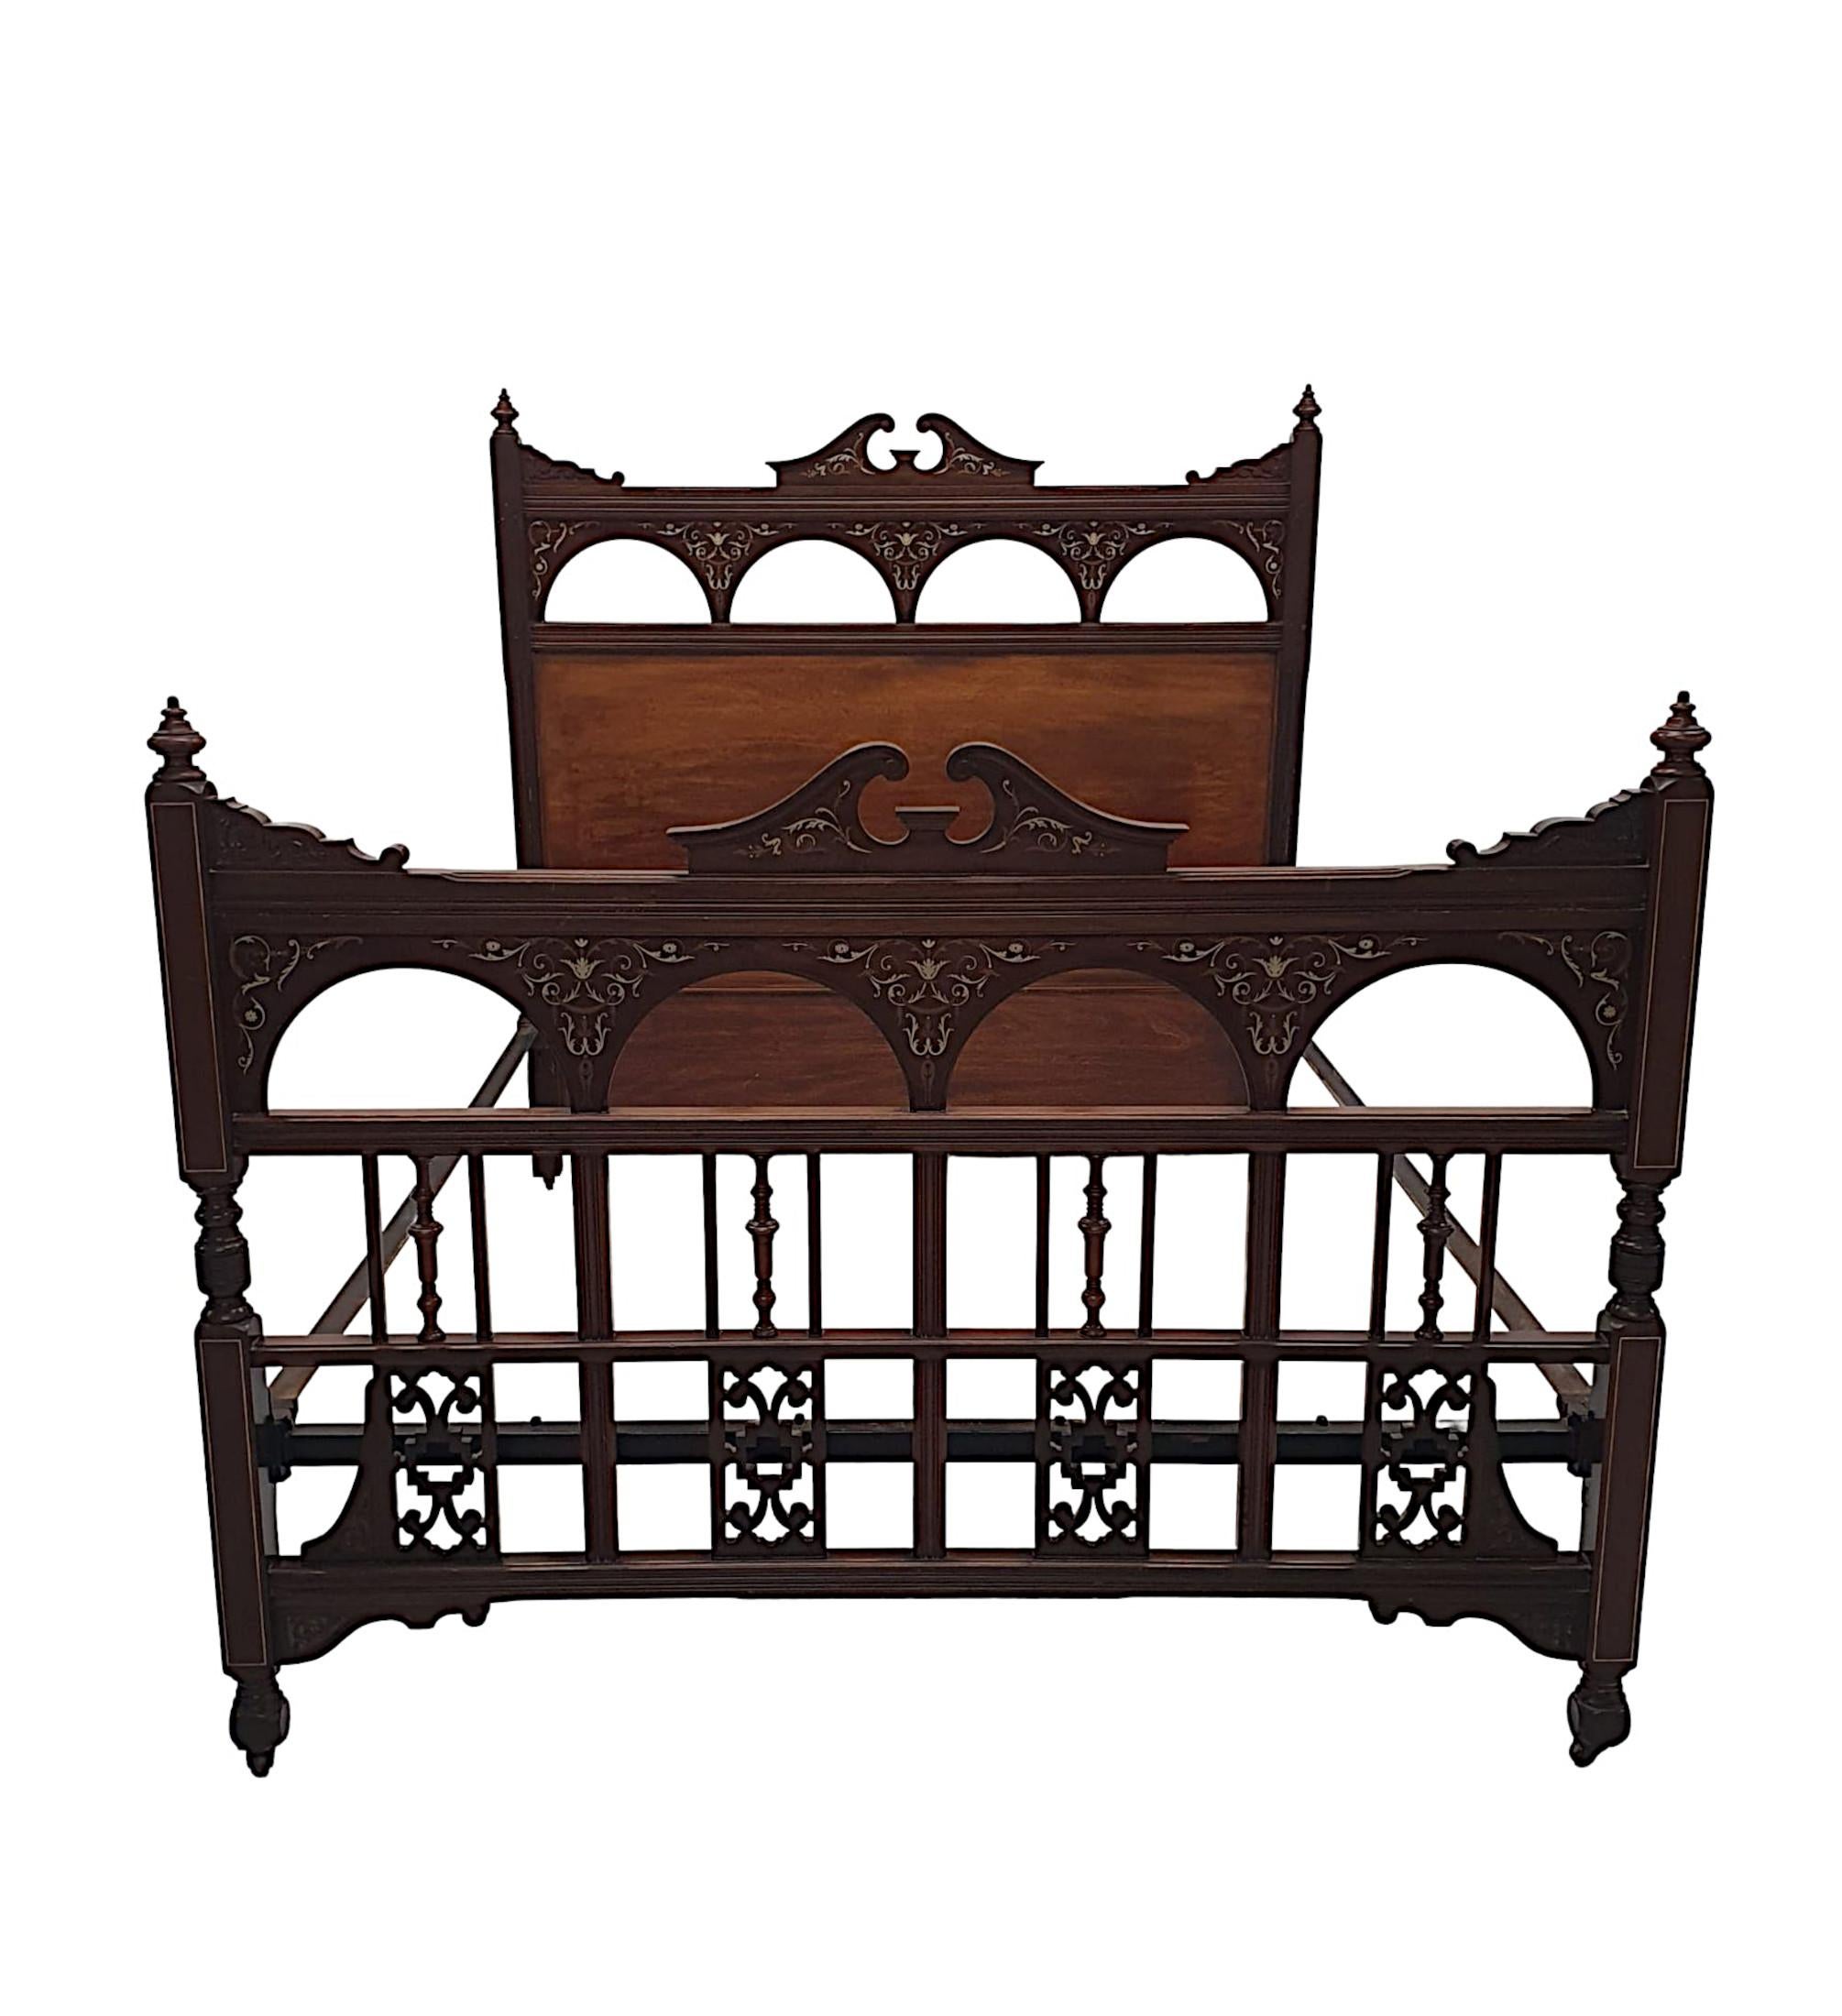 A fabulous late 19th Century inlaid mahogany five foot wide bed, finely hand carved, richly patinated and inlaid with stunning detail throughout. The moulded foot and headboard both feature a centred broken swan neck pediment flanked with carved